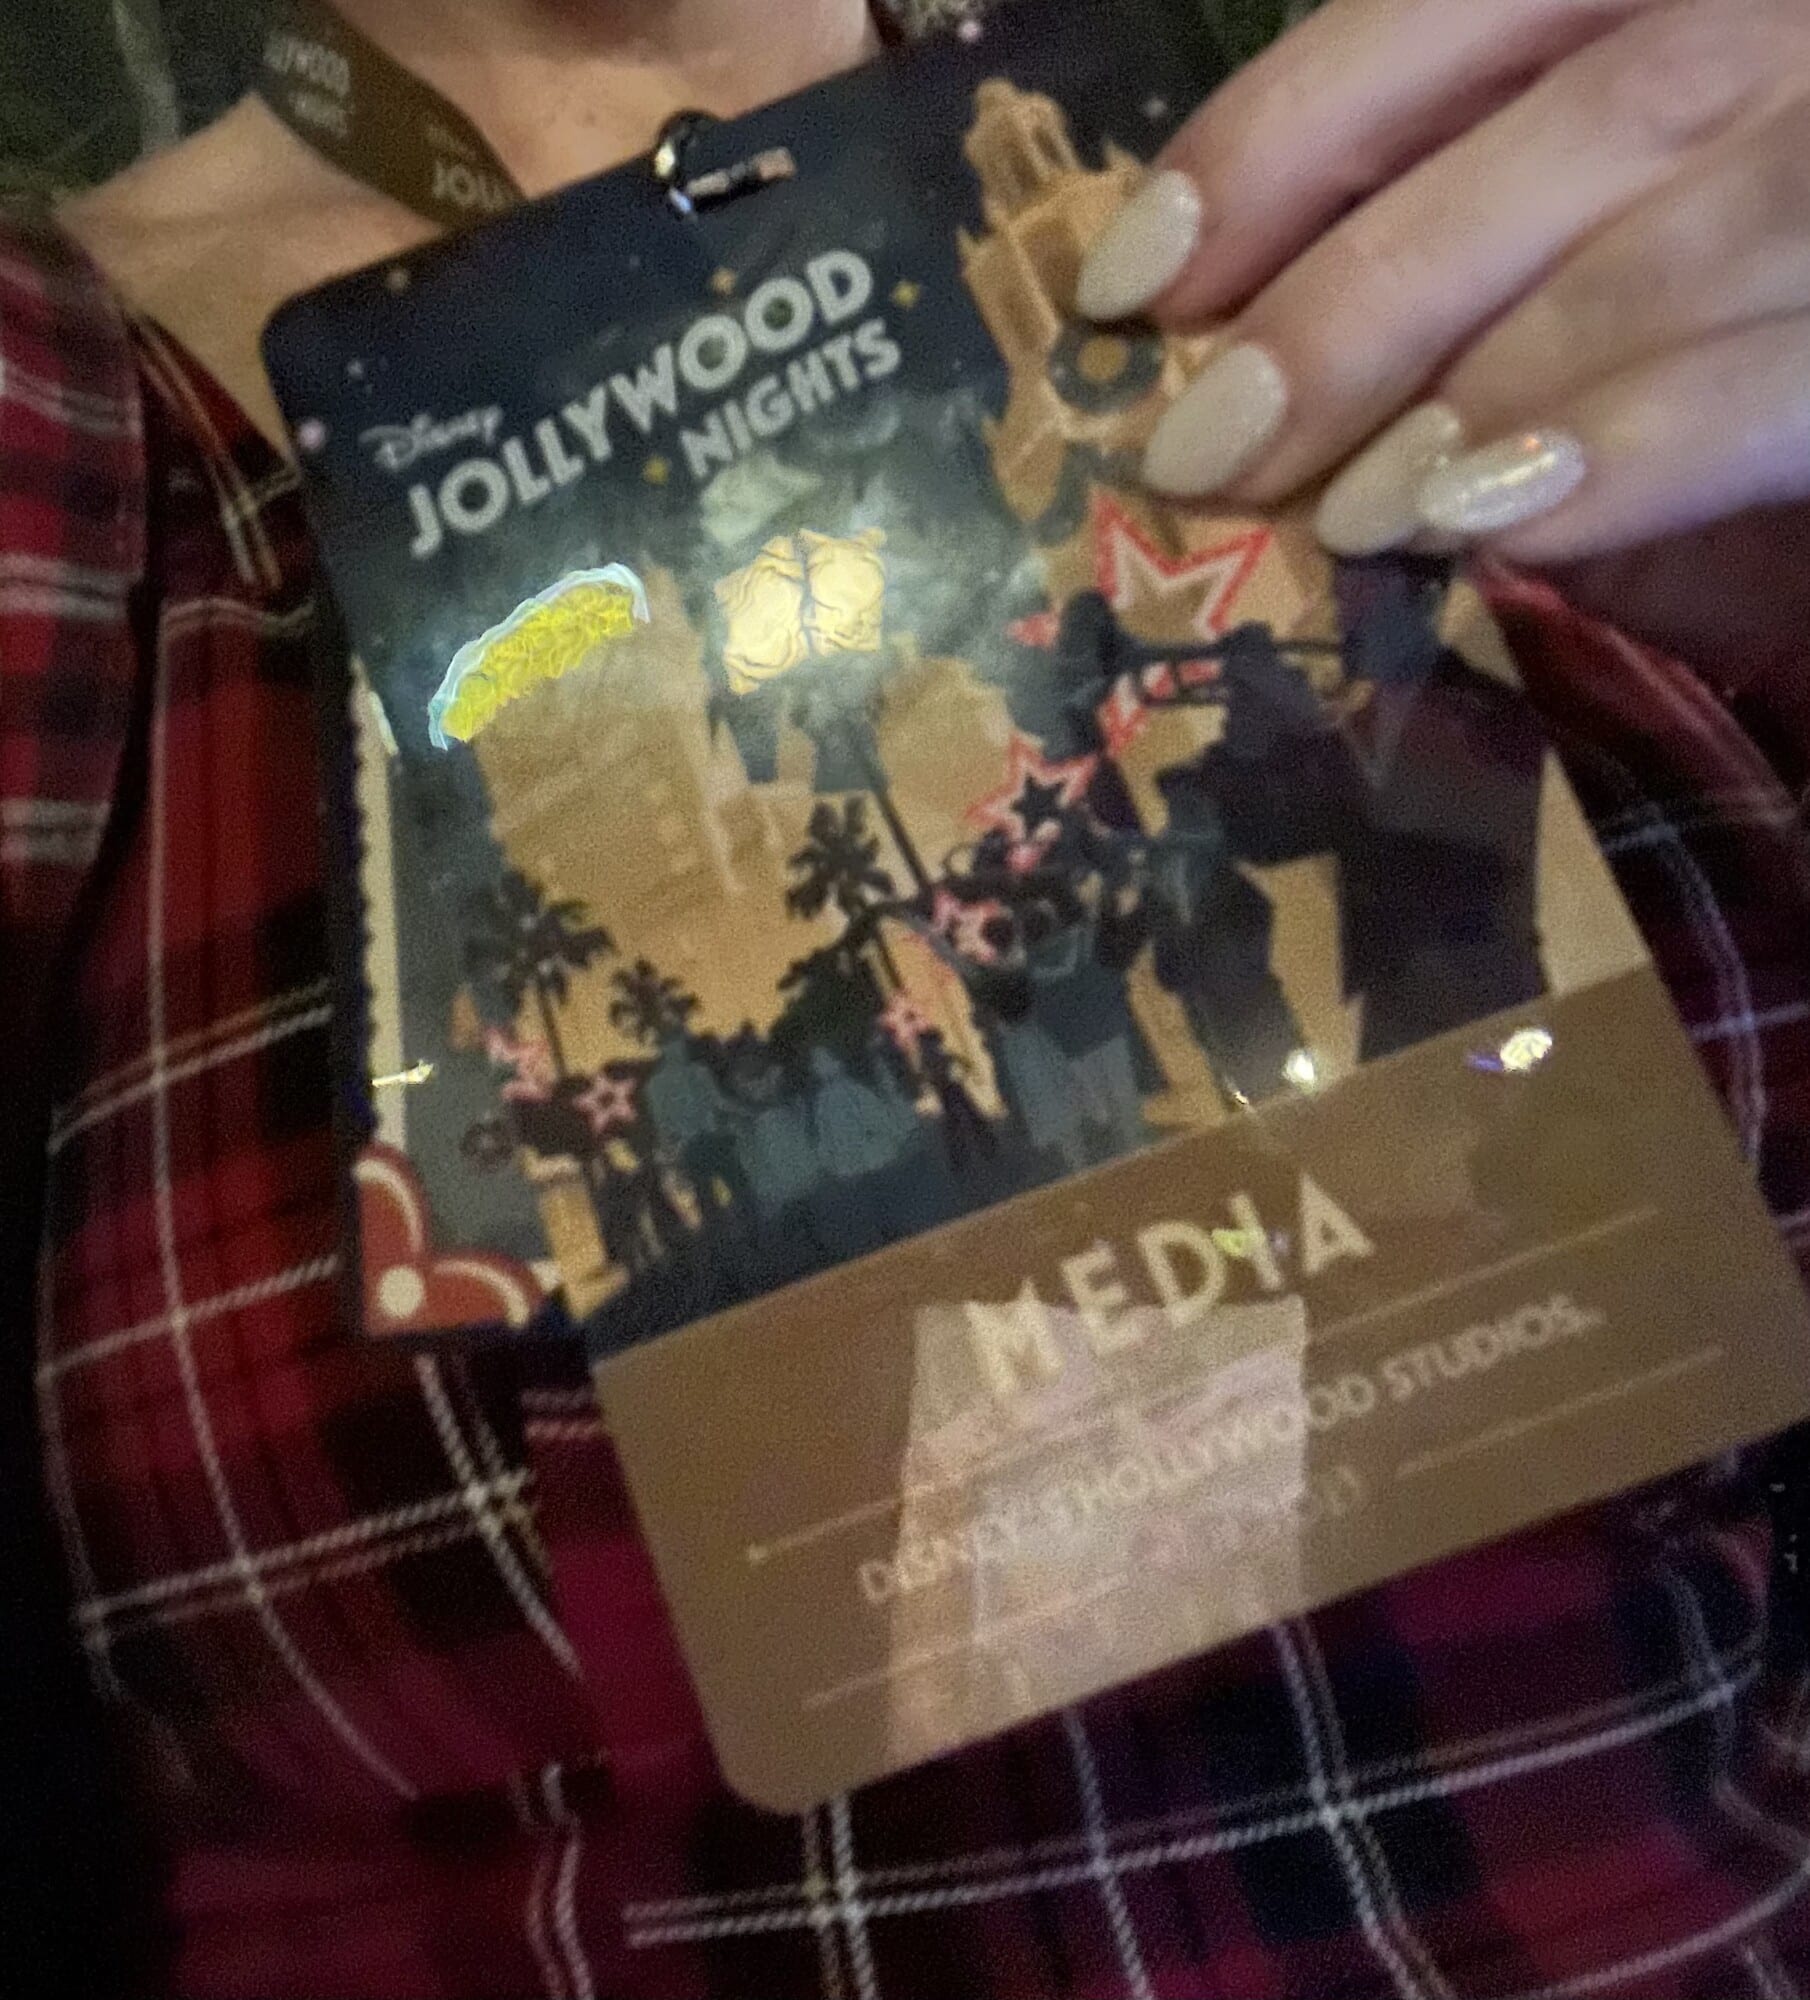 The Premiere of Jollywood Nights at Hollywood Studios